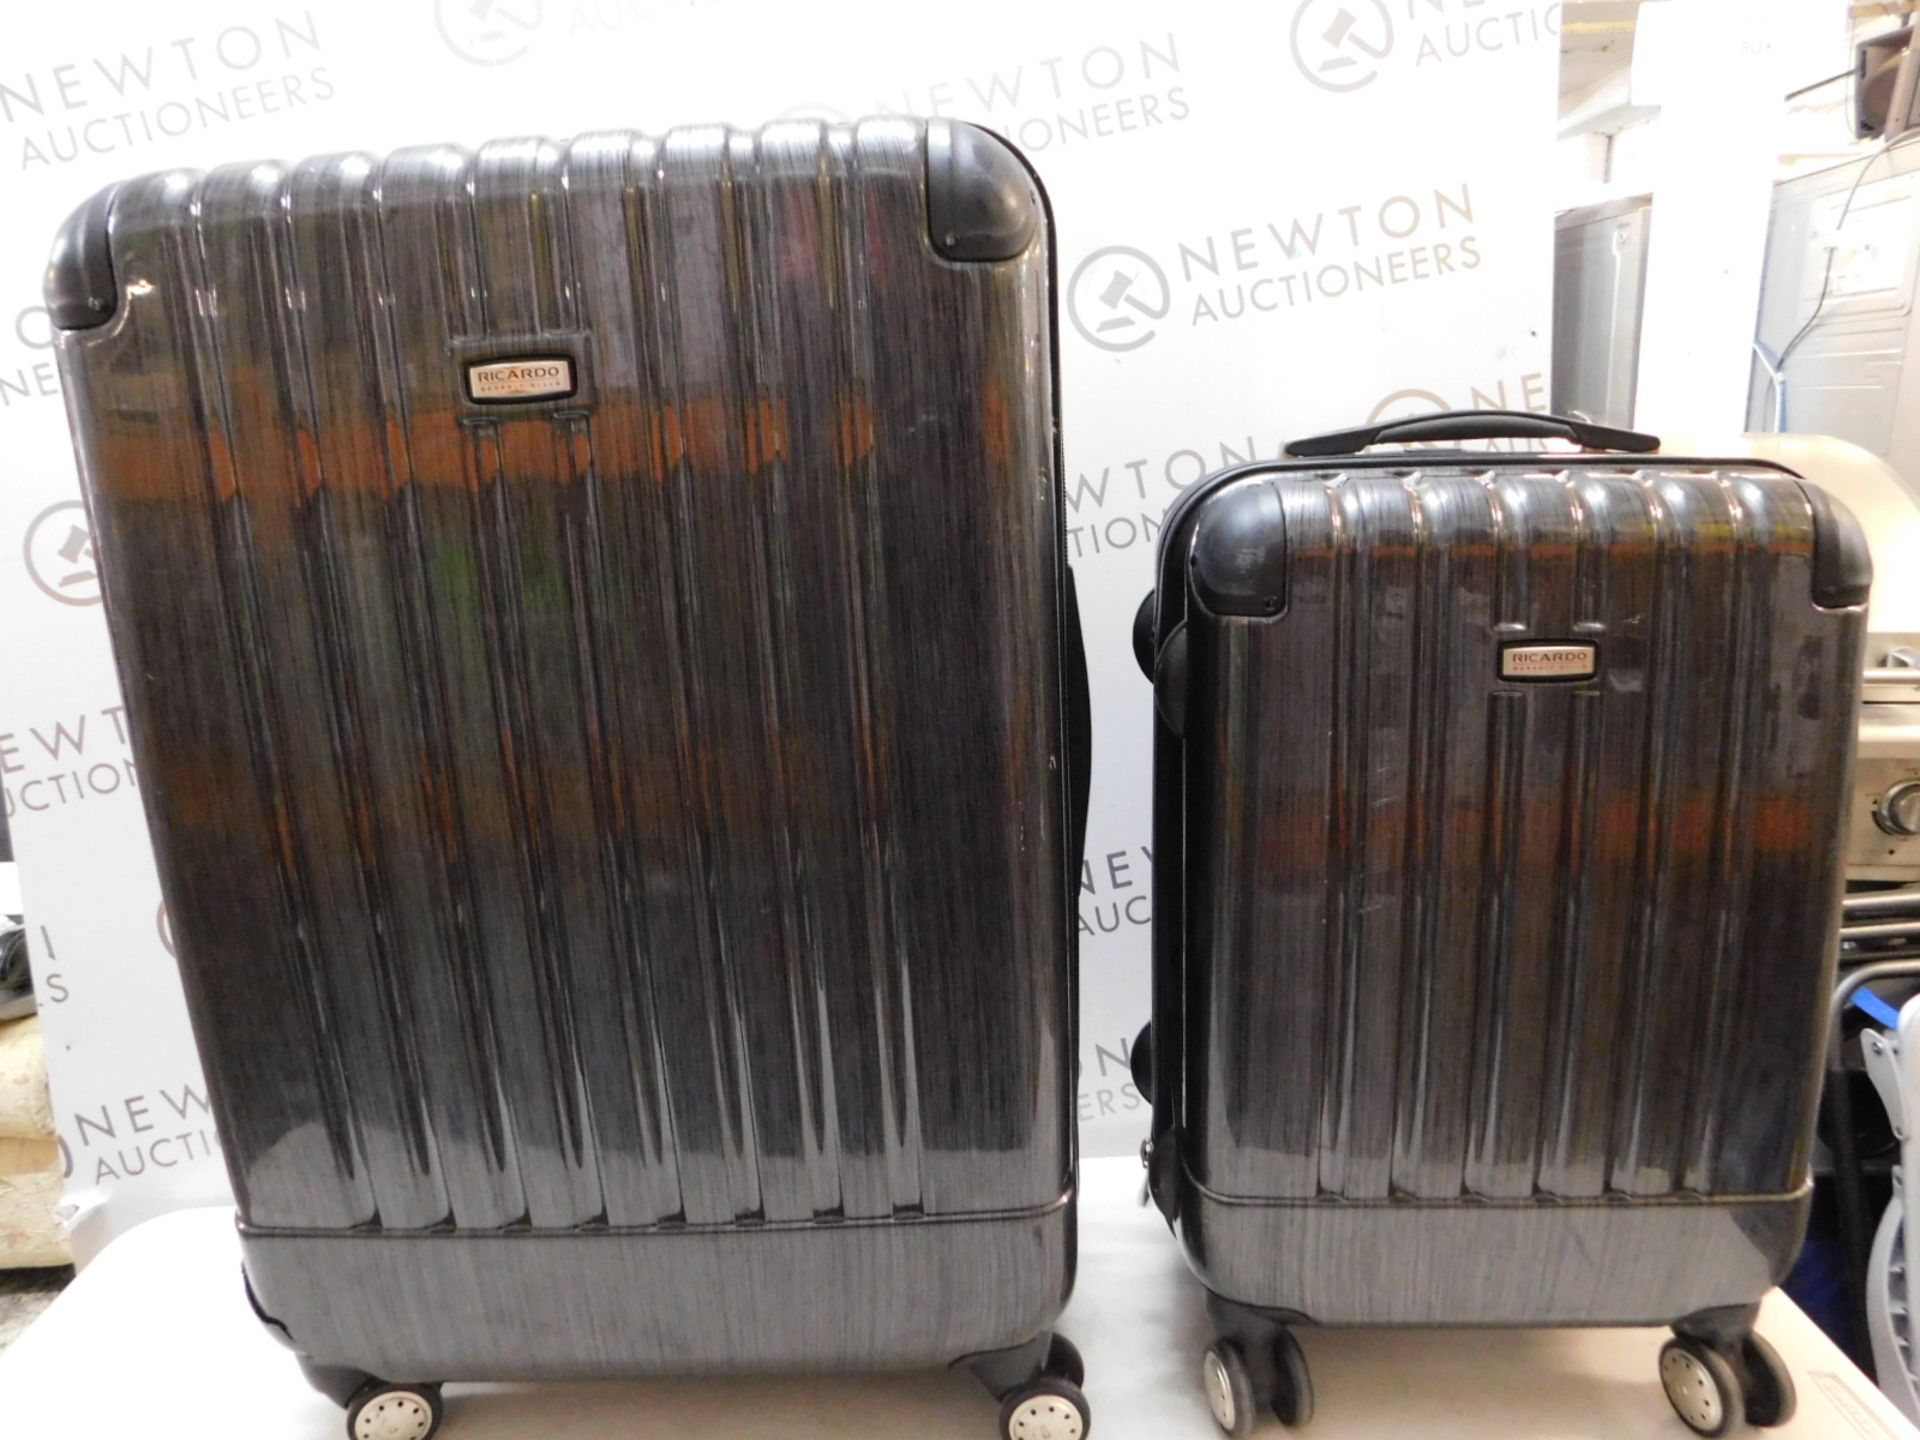 1 RICARDO BEVERLY HILLS 2-PIECE POLYCARBONATE 360 SPINNER LUGGAGE SET RRP £199